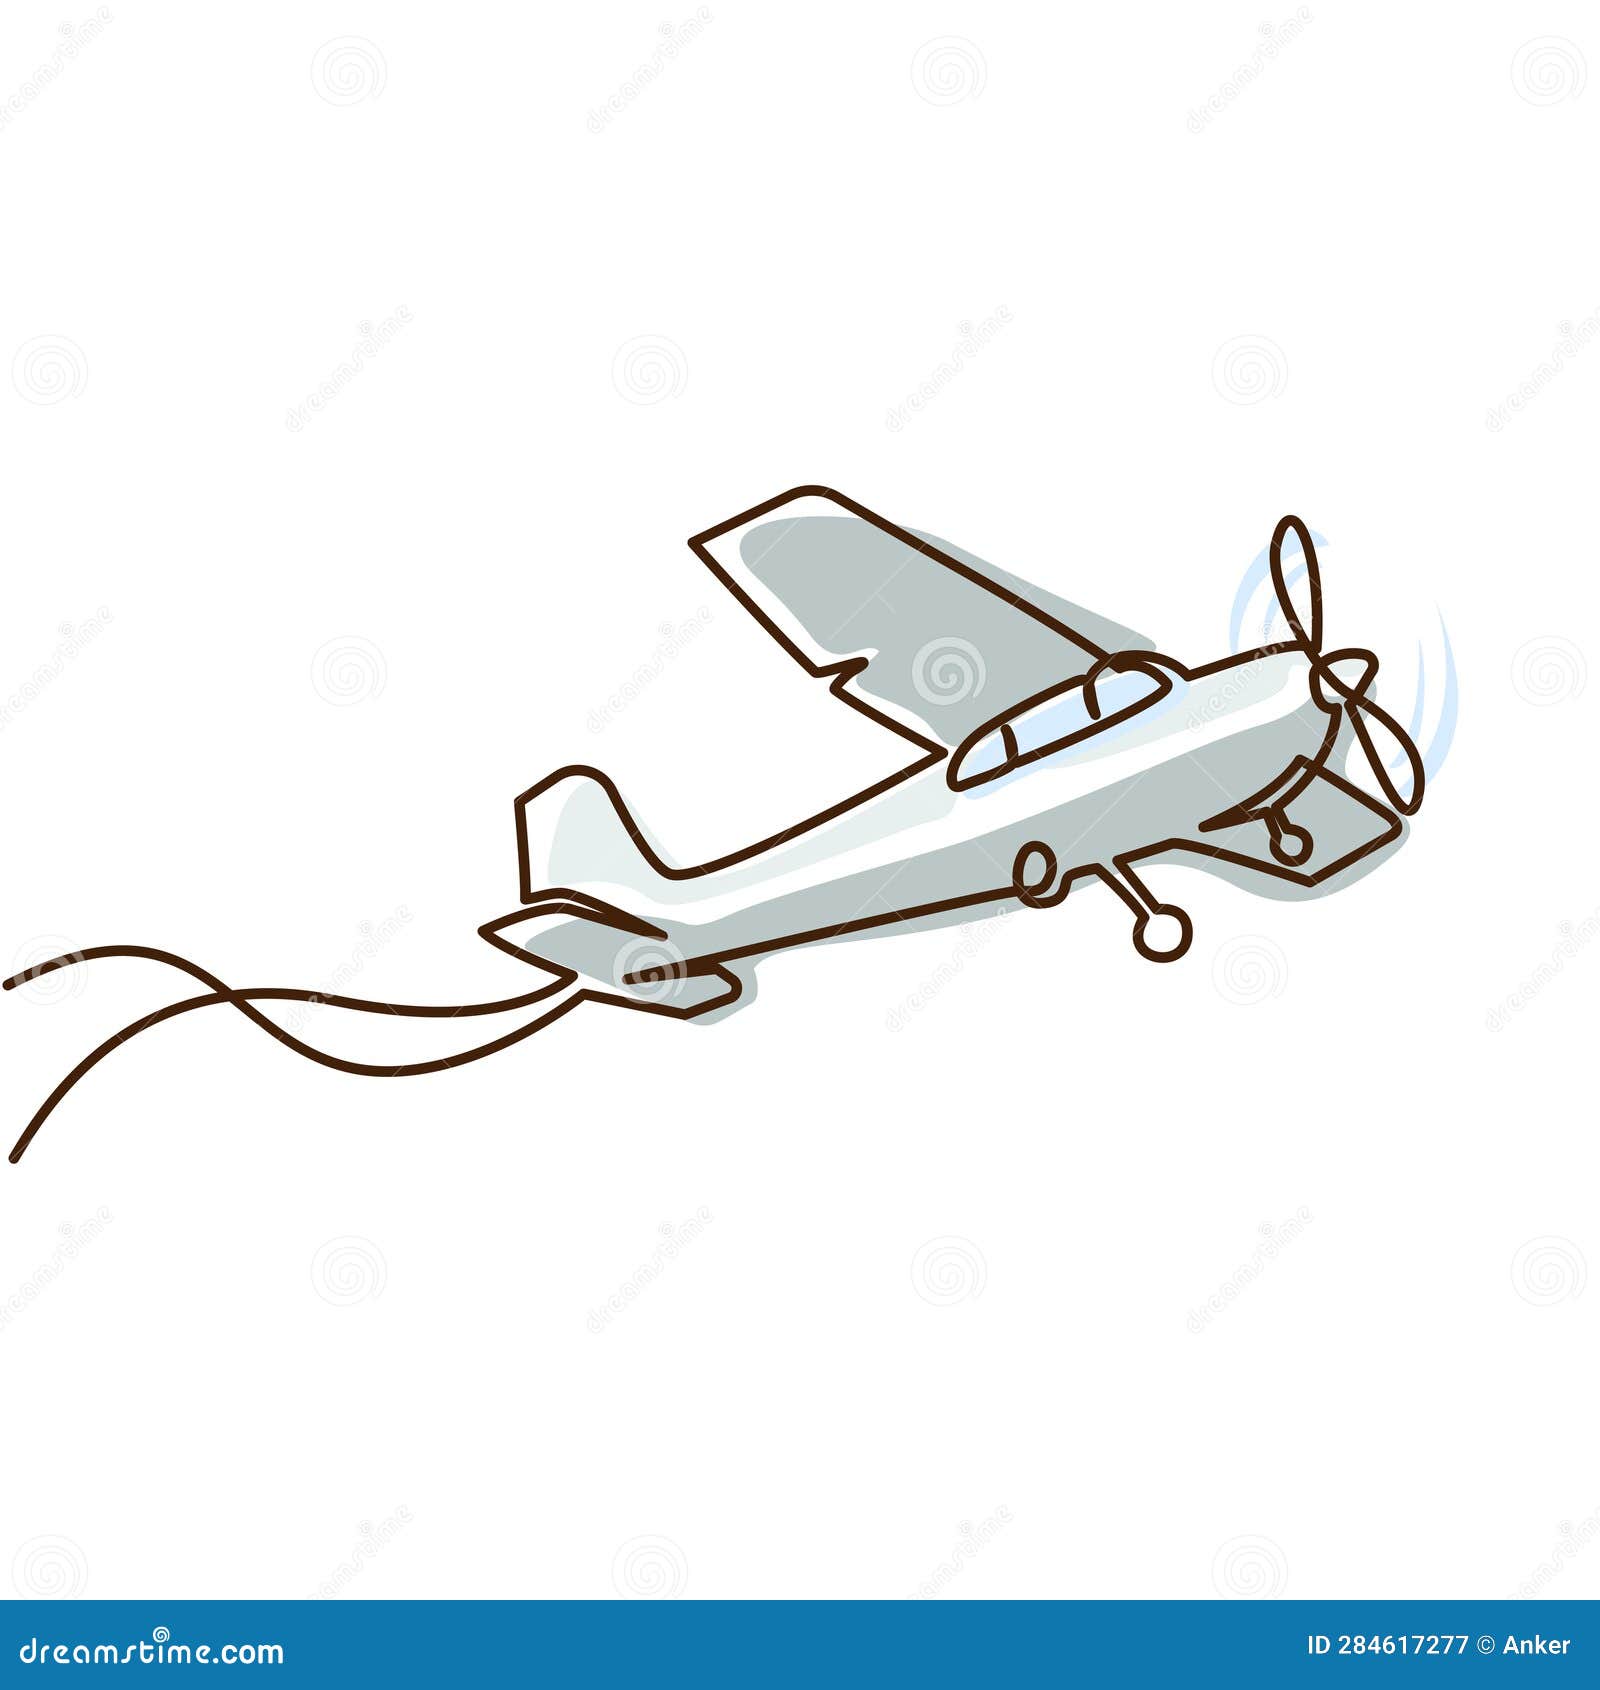 Aircraft Sketch PNG Transparent Images Free Download  Vector Files   Pngtree